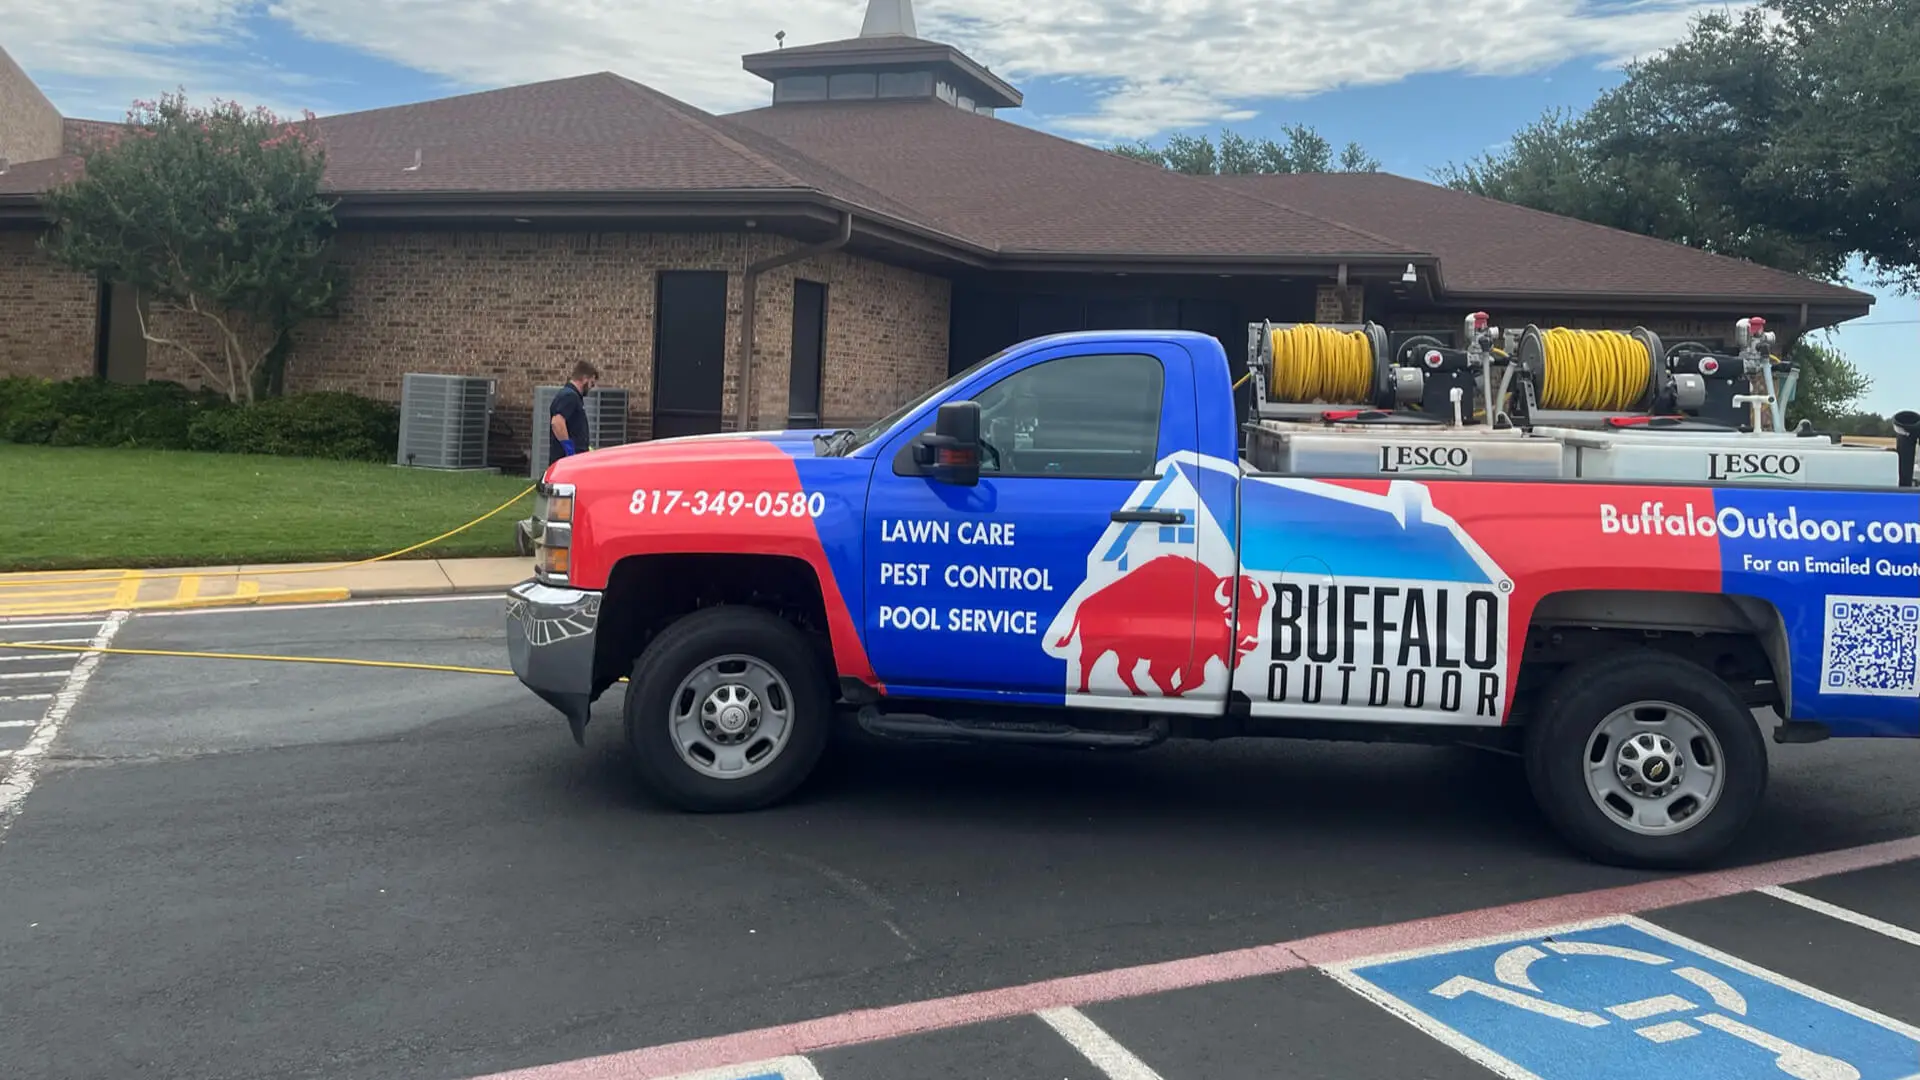 Buffalo Outdoor work truck at a home in Saginaw, Texas.